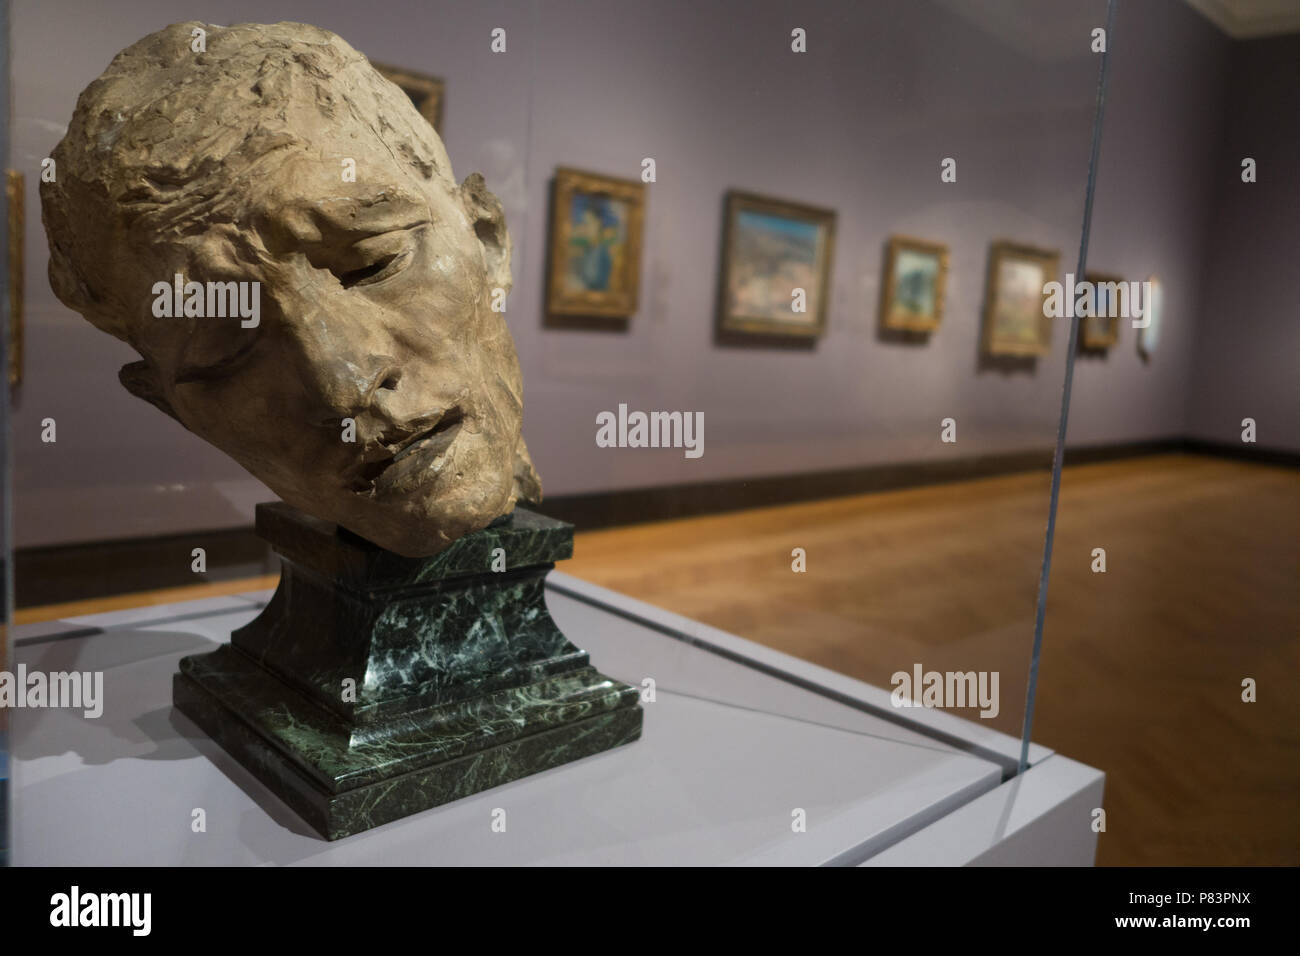 Statues, sculpture, busts and other classical art on display at the Art Gallery of Ontario, Toronto, Ontario, Canada Stock Photo